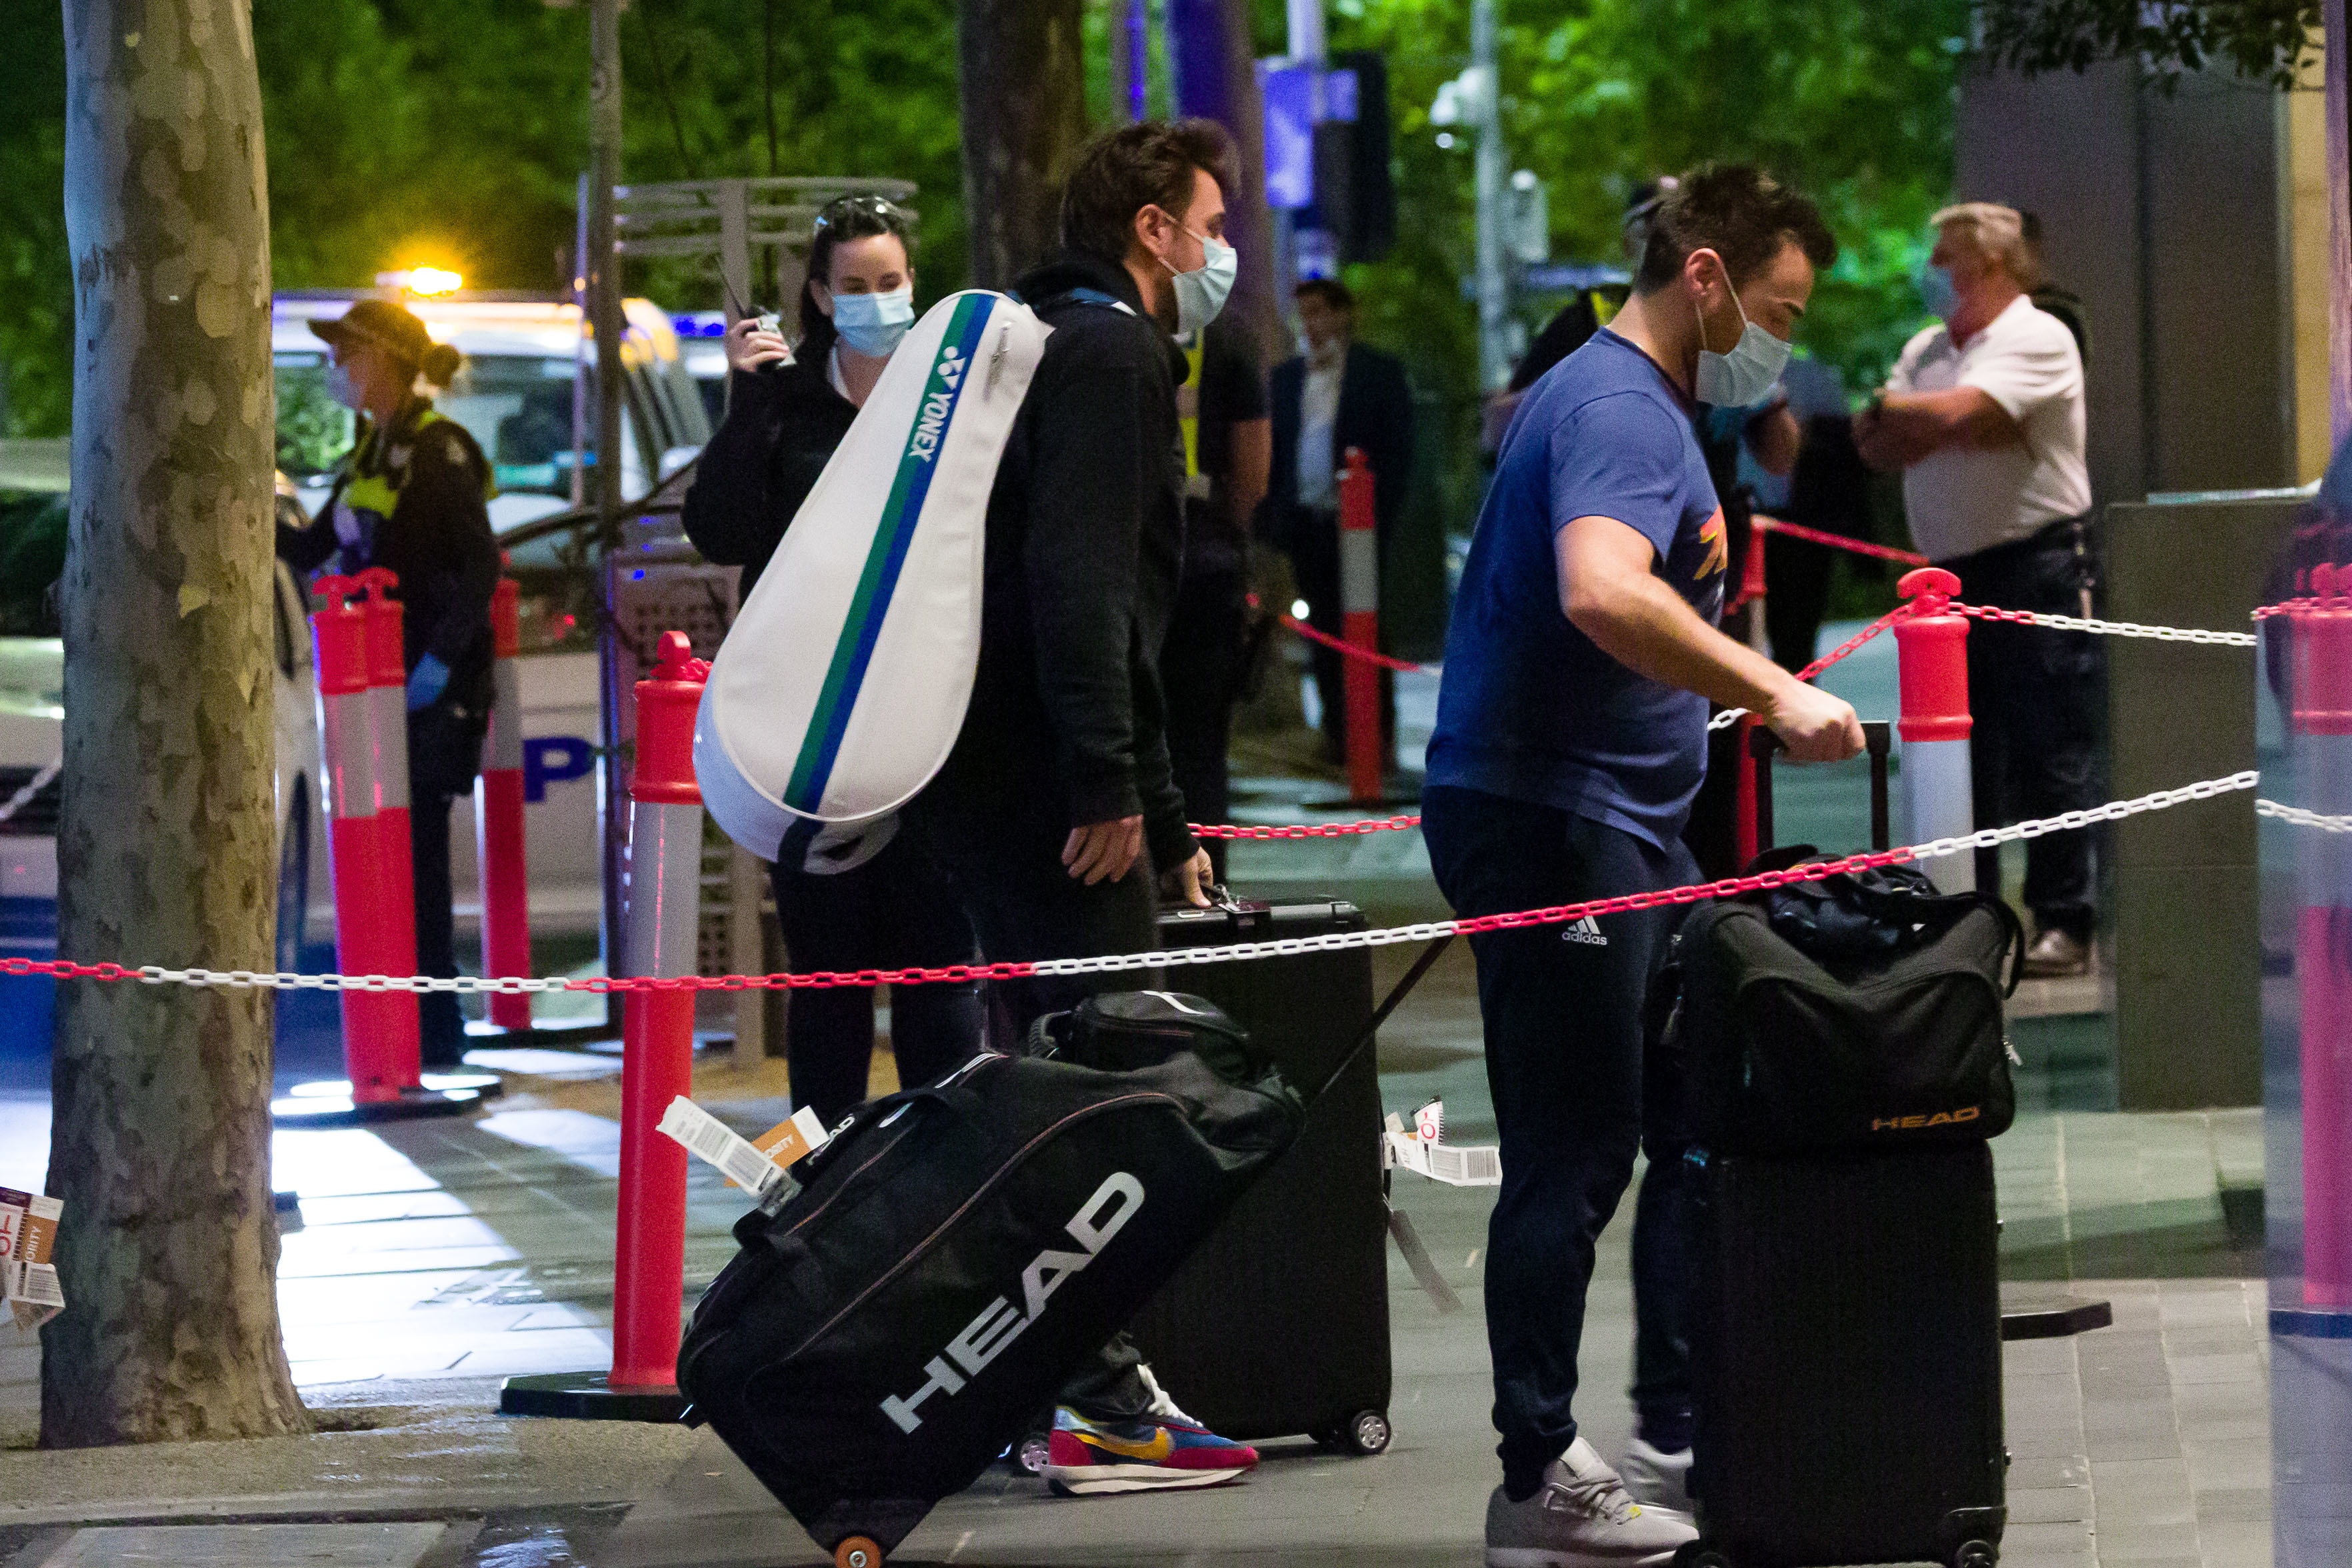 Tennis players arriving at the Grand Hyatt hotel in Melbourne under quarantine conditions ahead of the 2021 Australian Open.